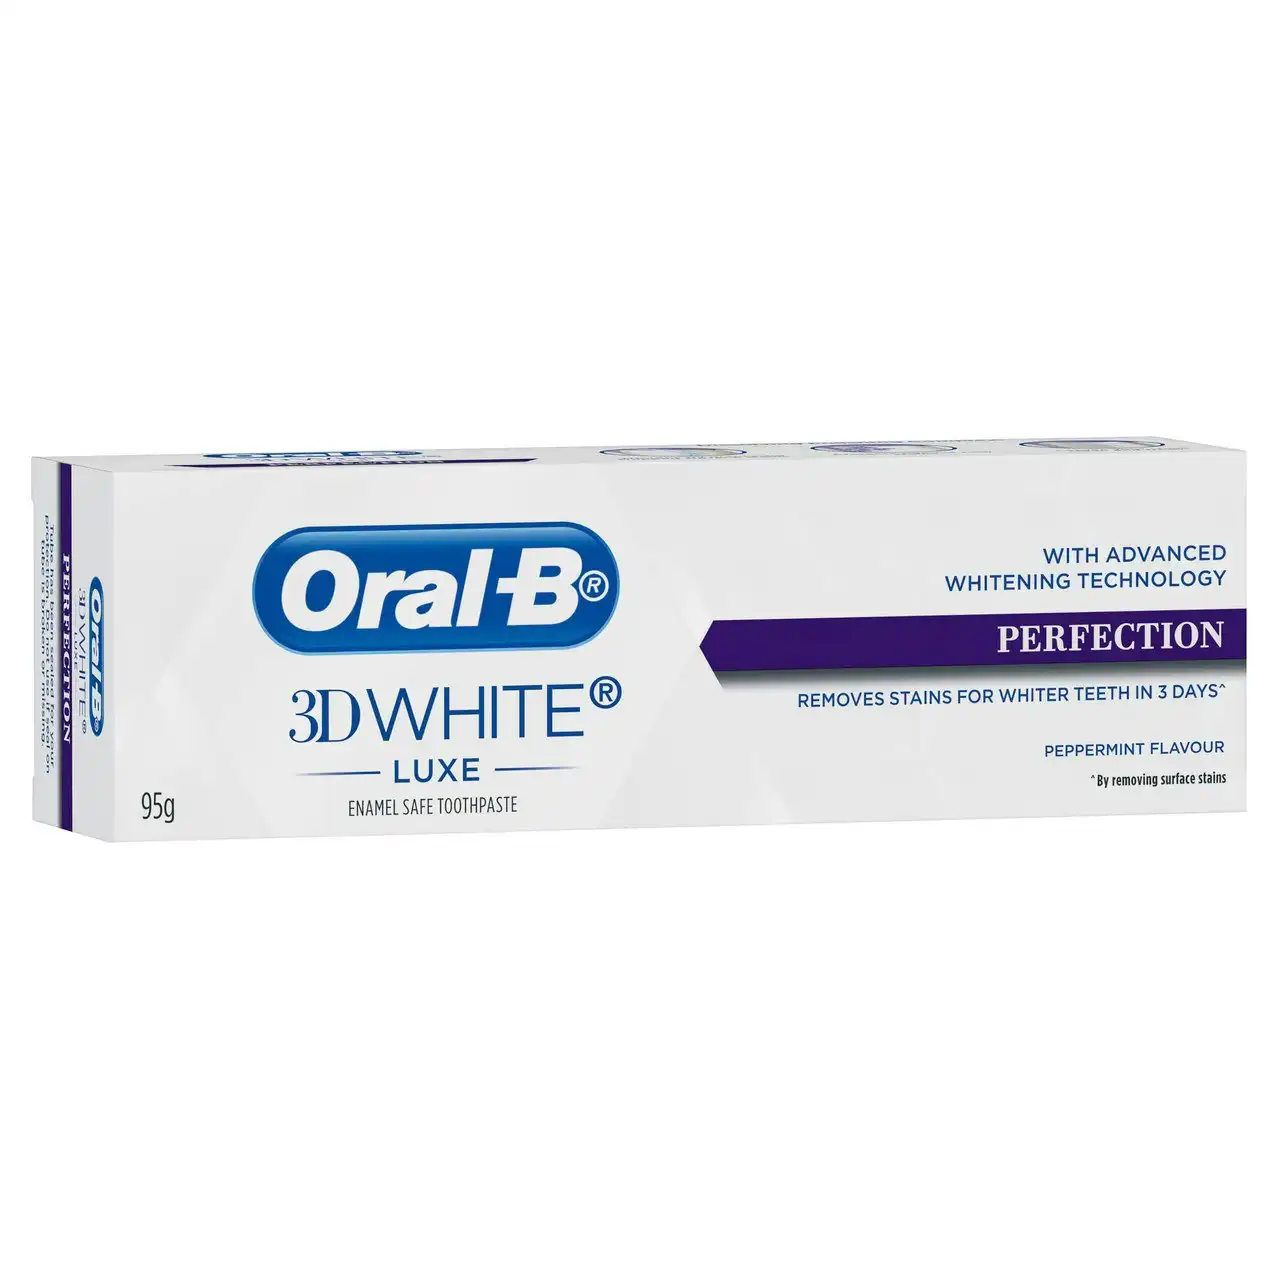 Oral-B 3DWhite Luxe Perfection Whitening Toothpaste, 95g